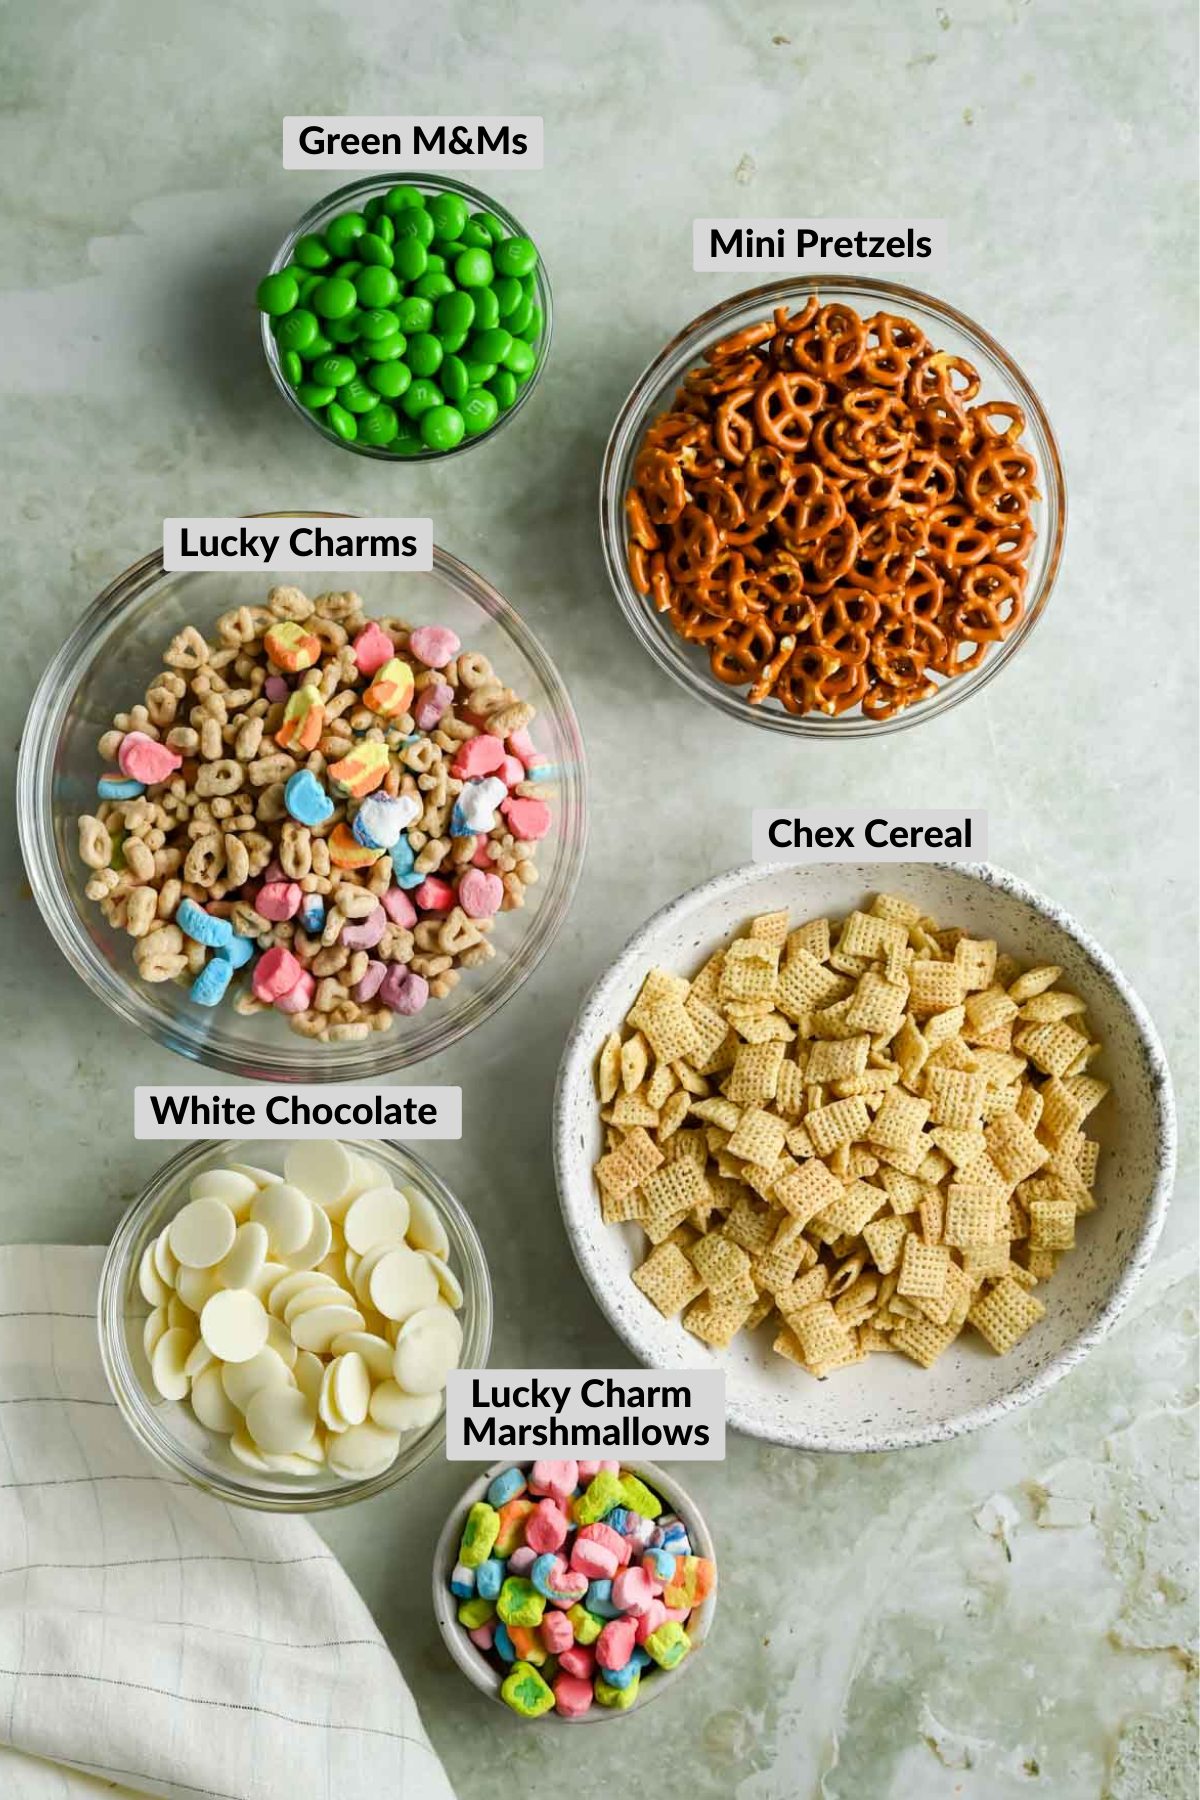 labeled ingredients for leprechaun bait in individual bowls.